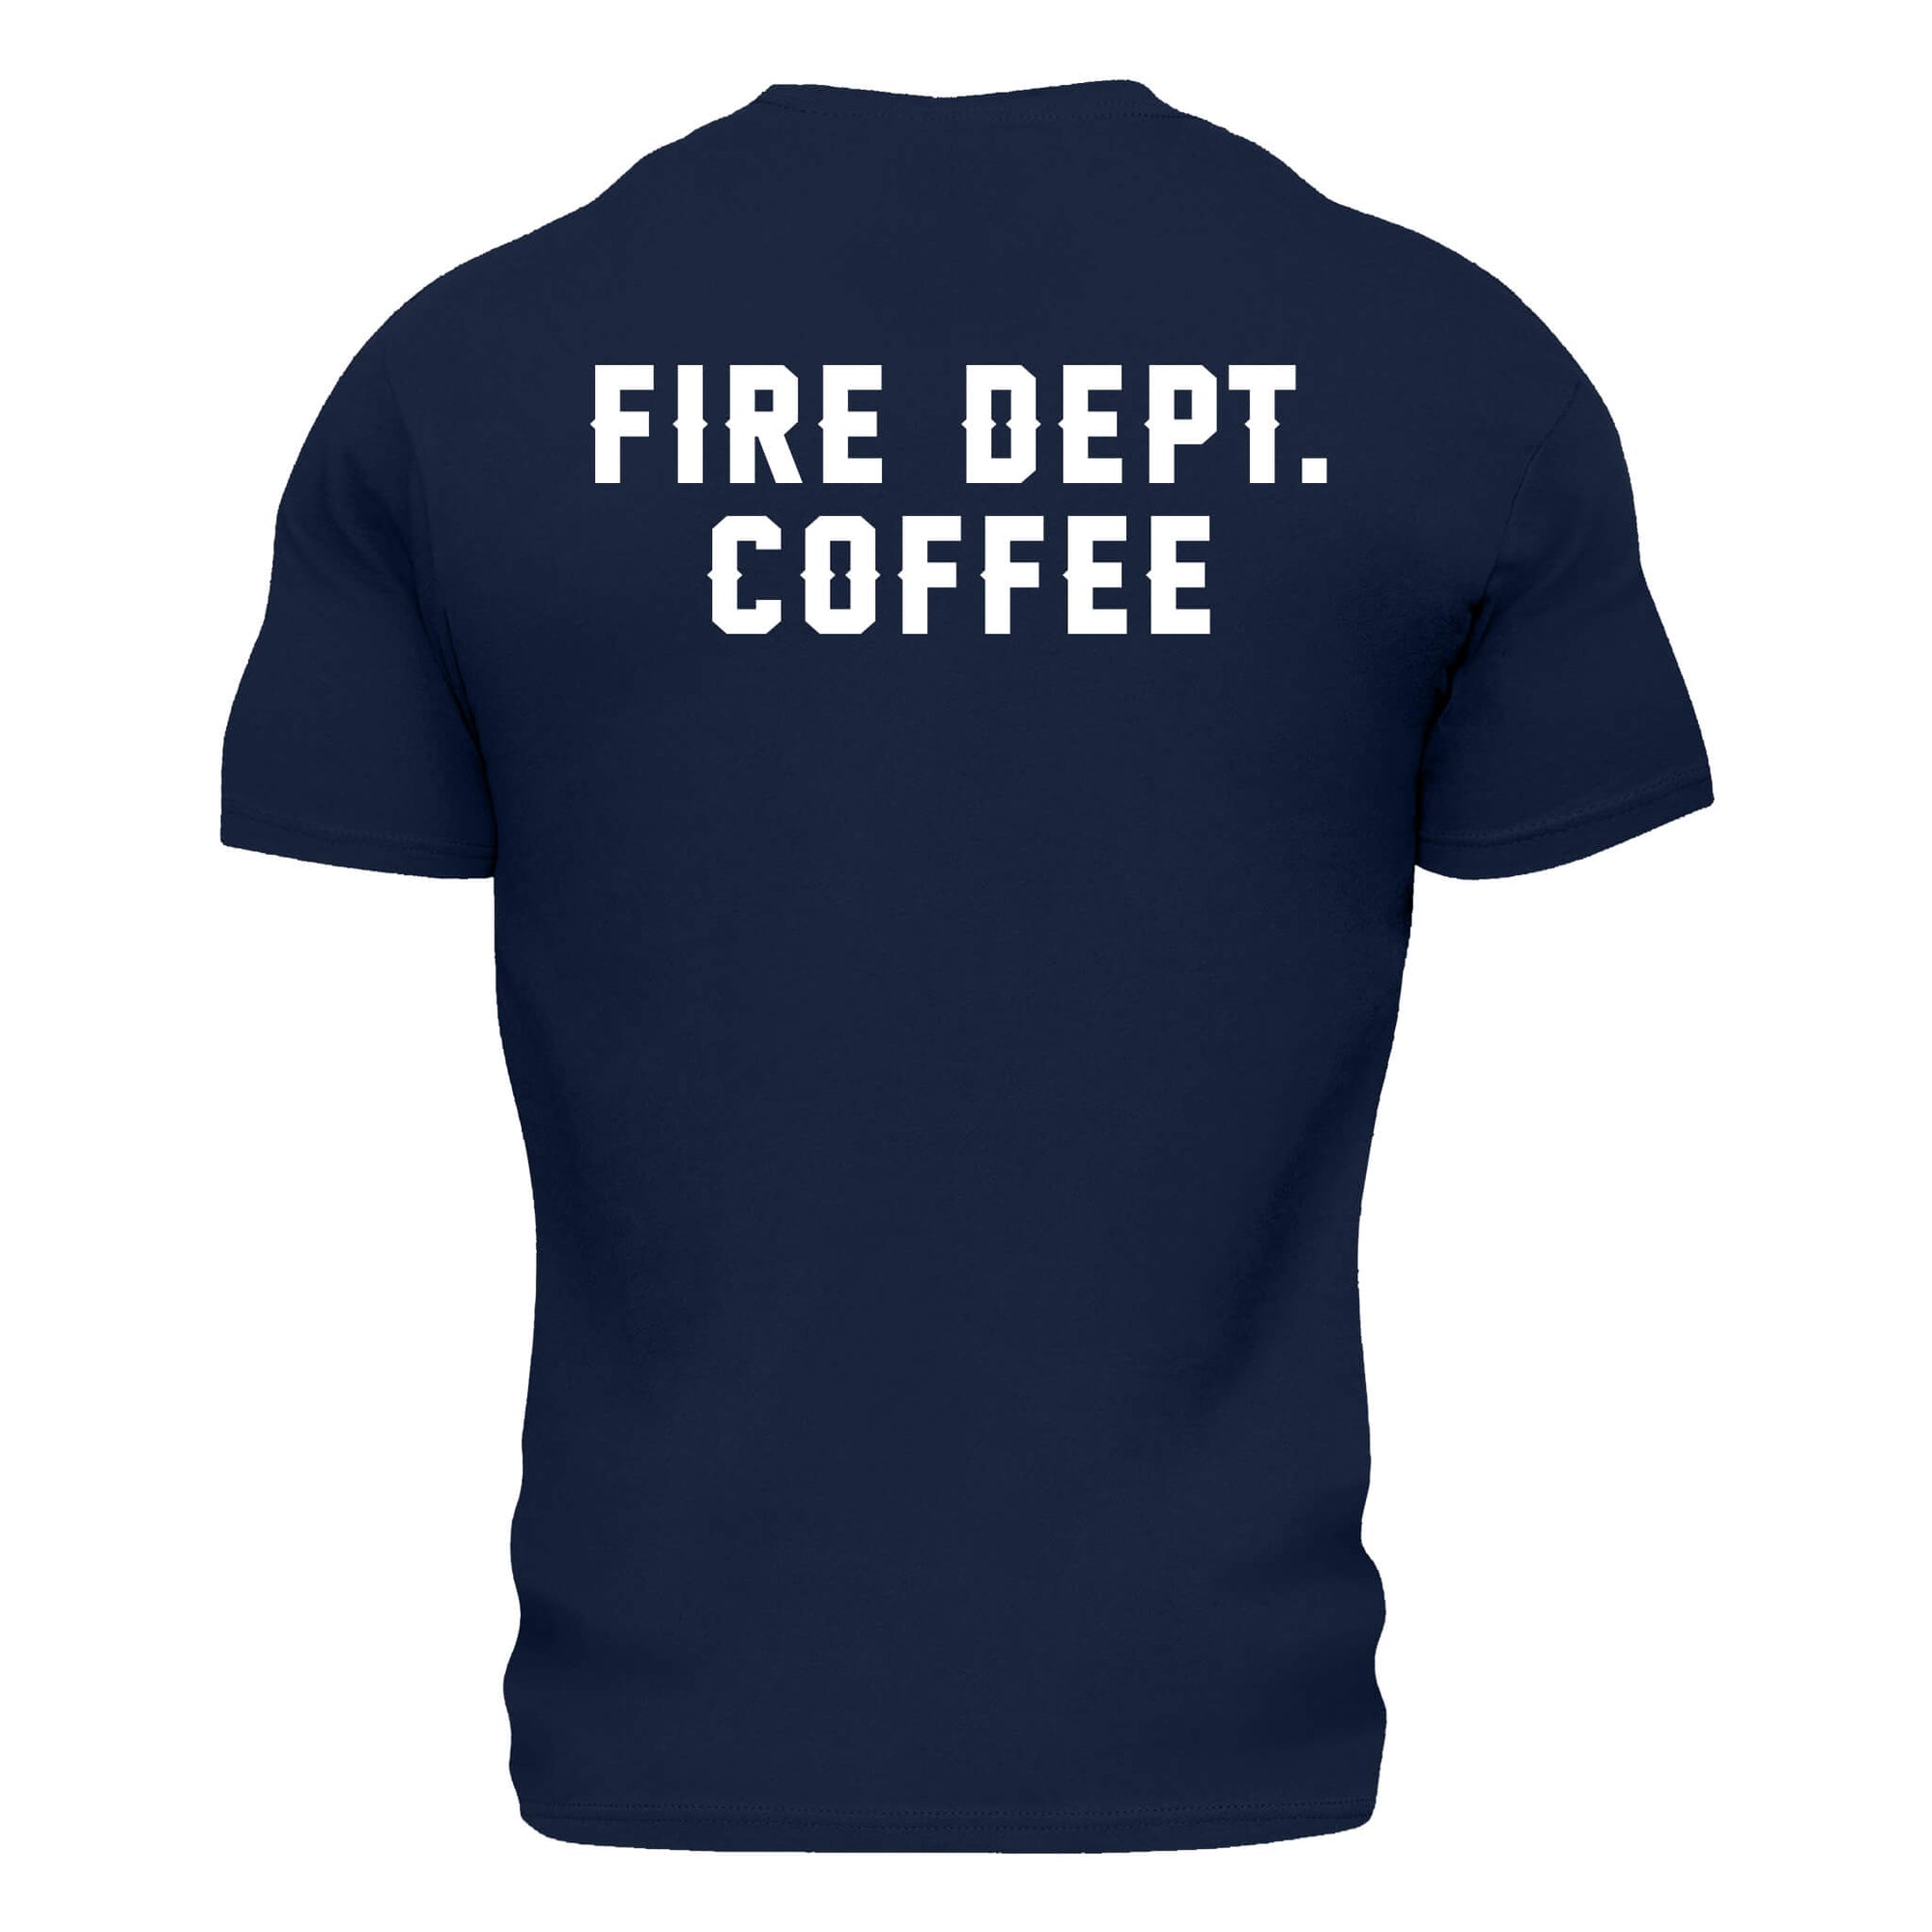 Back of navy shirt with "Fire Dept. Coffee"  written in large, white letters across the top of the back.